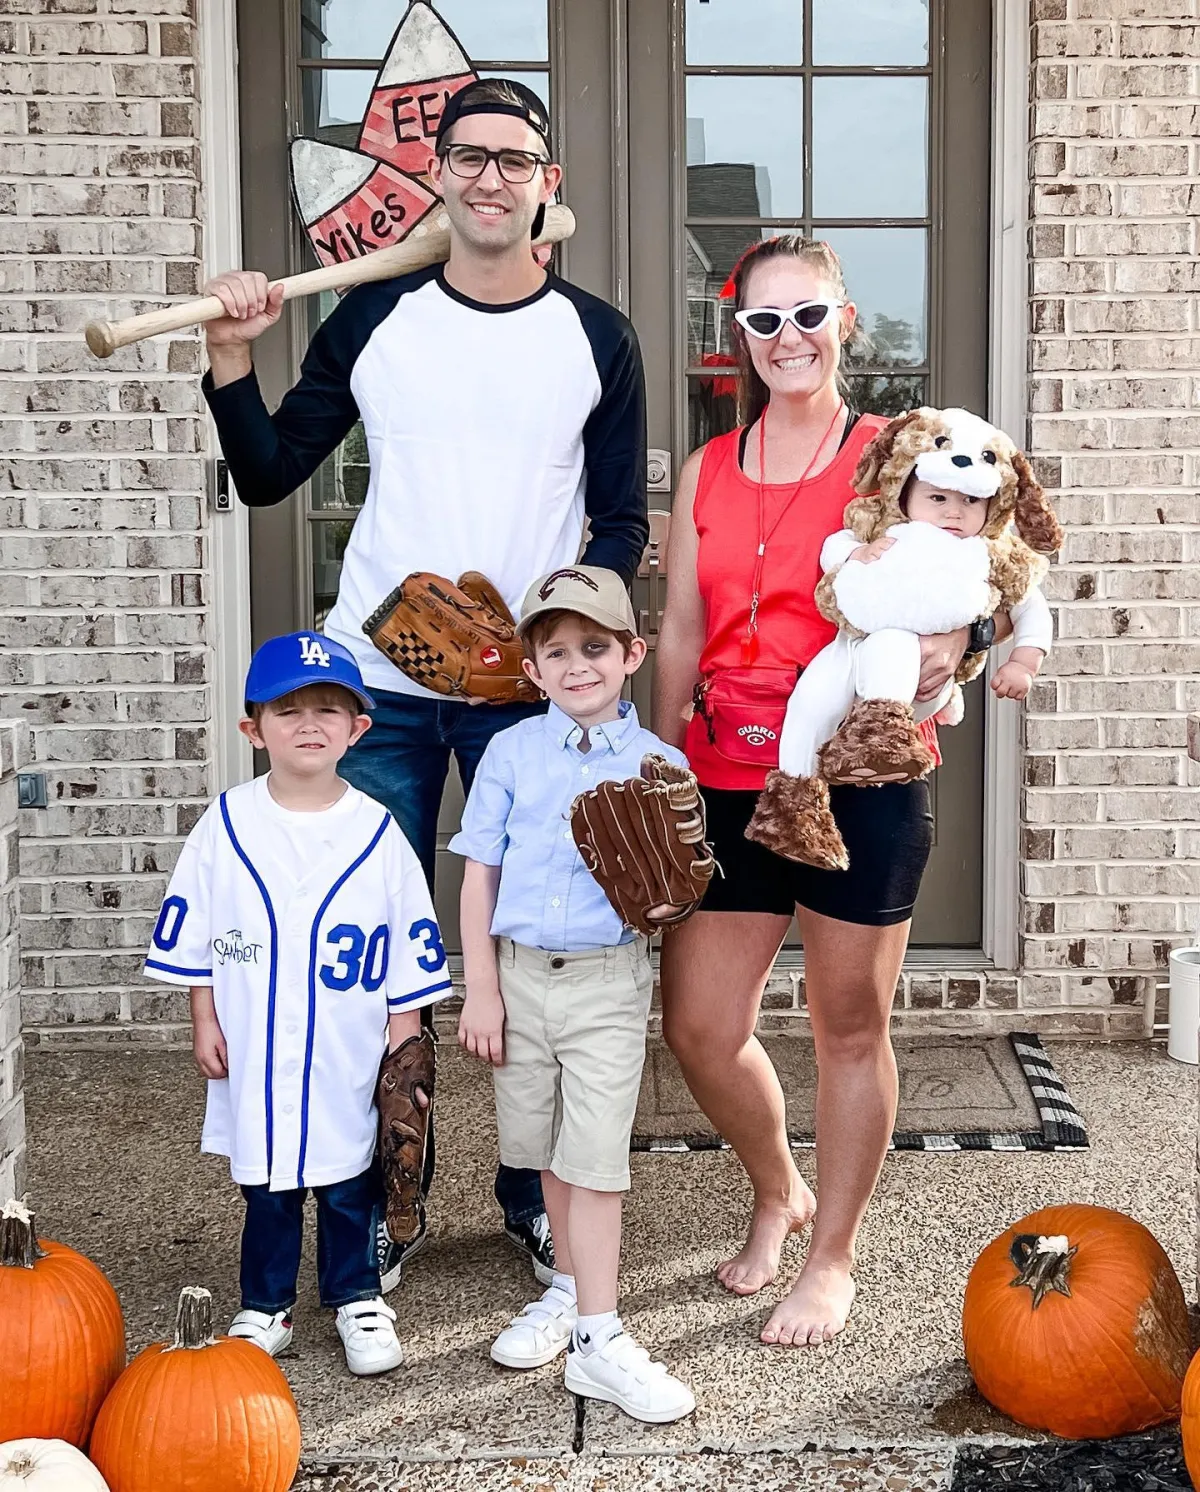 Kirk Teachout's family dressed up as characters from The Sandlot